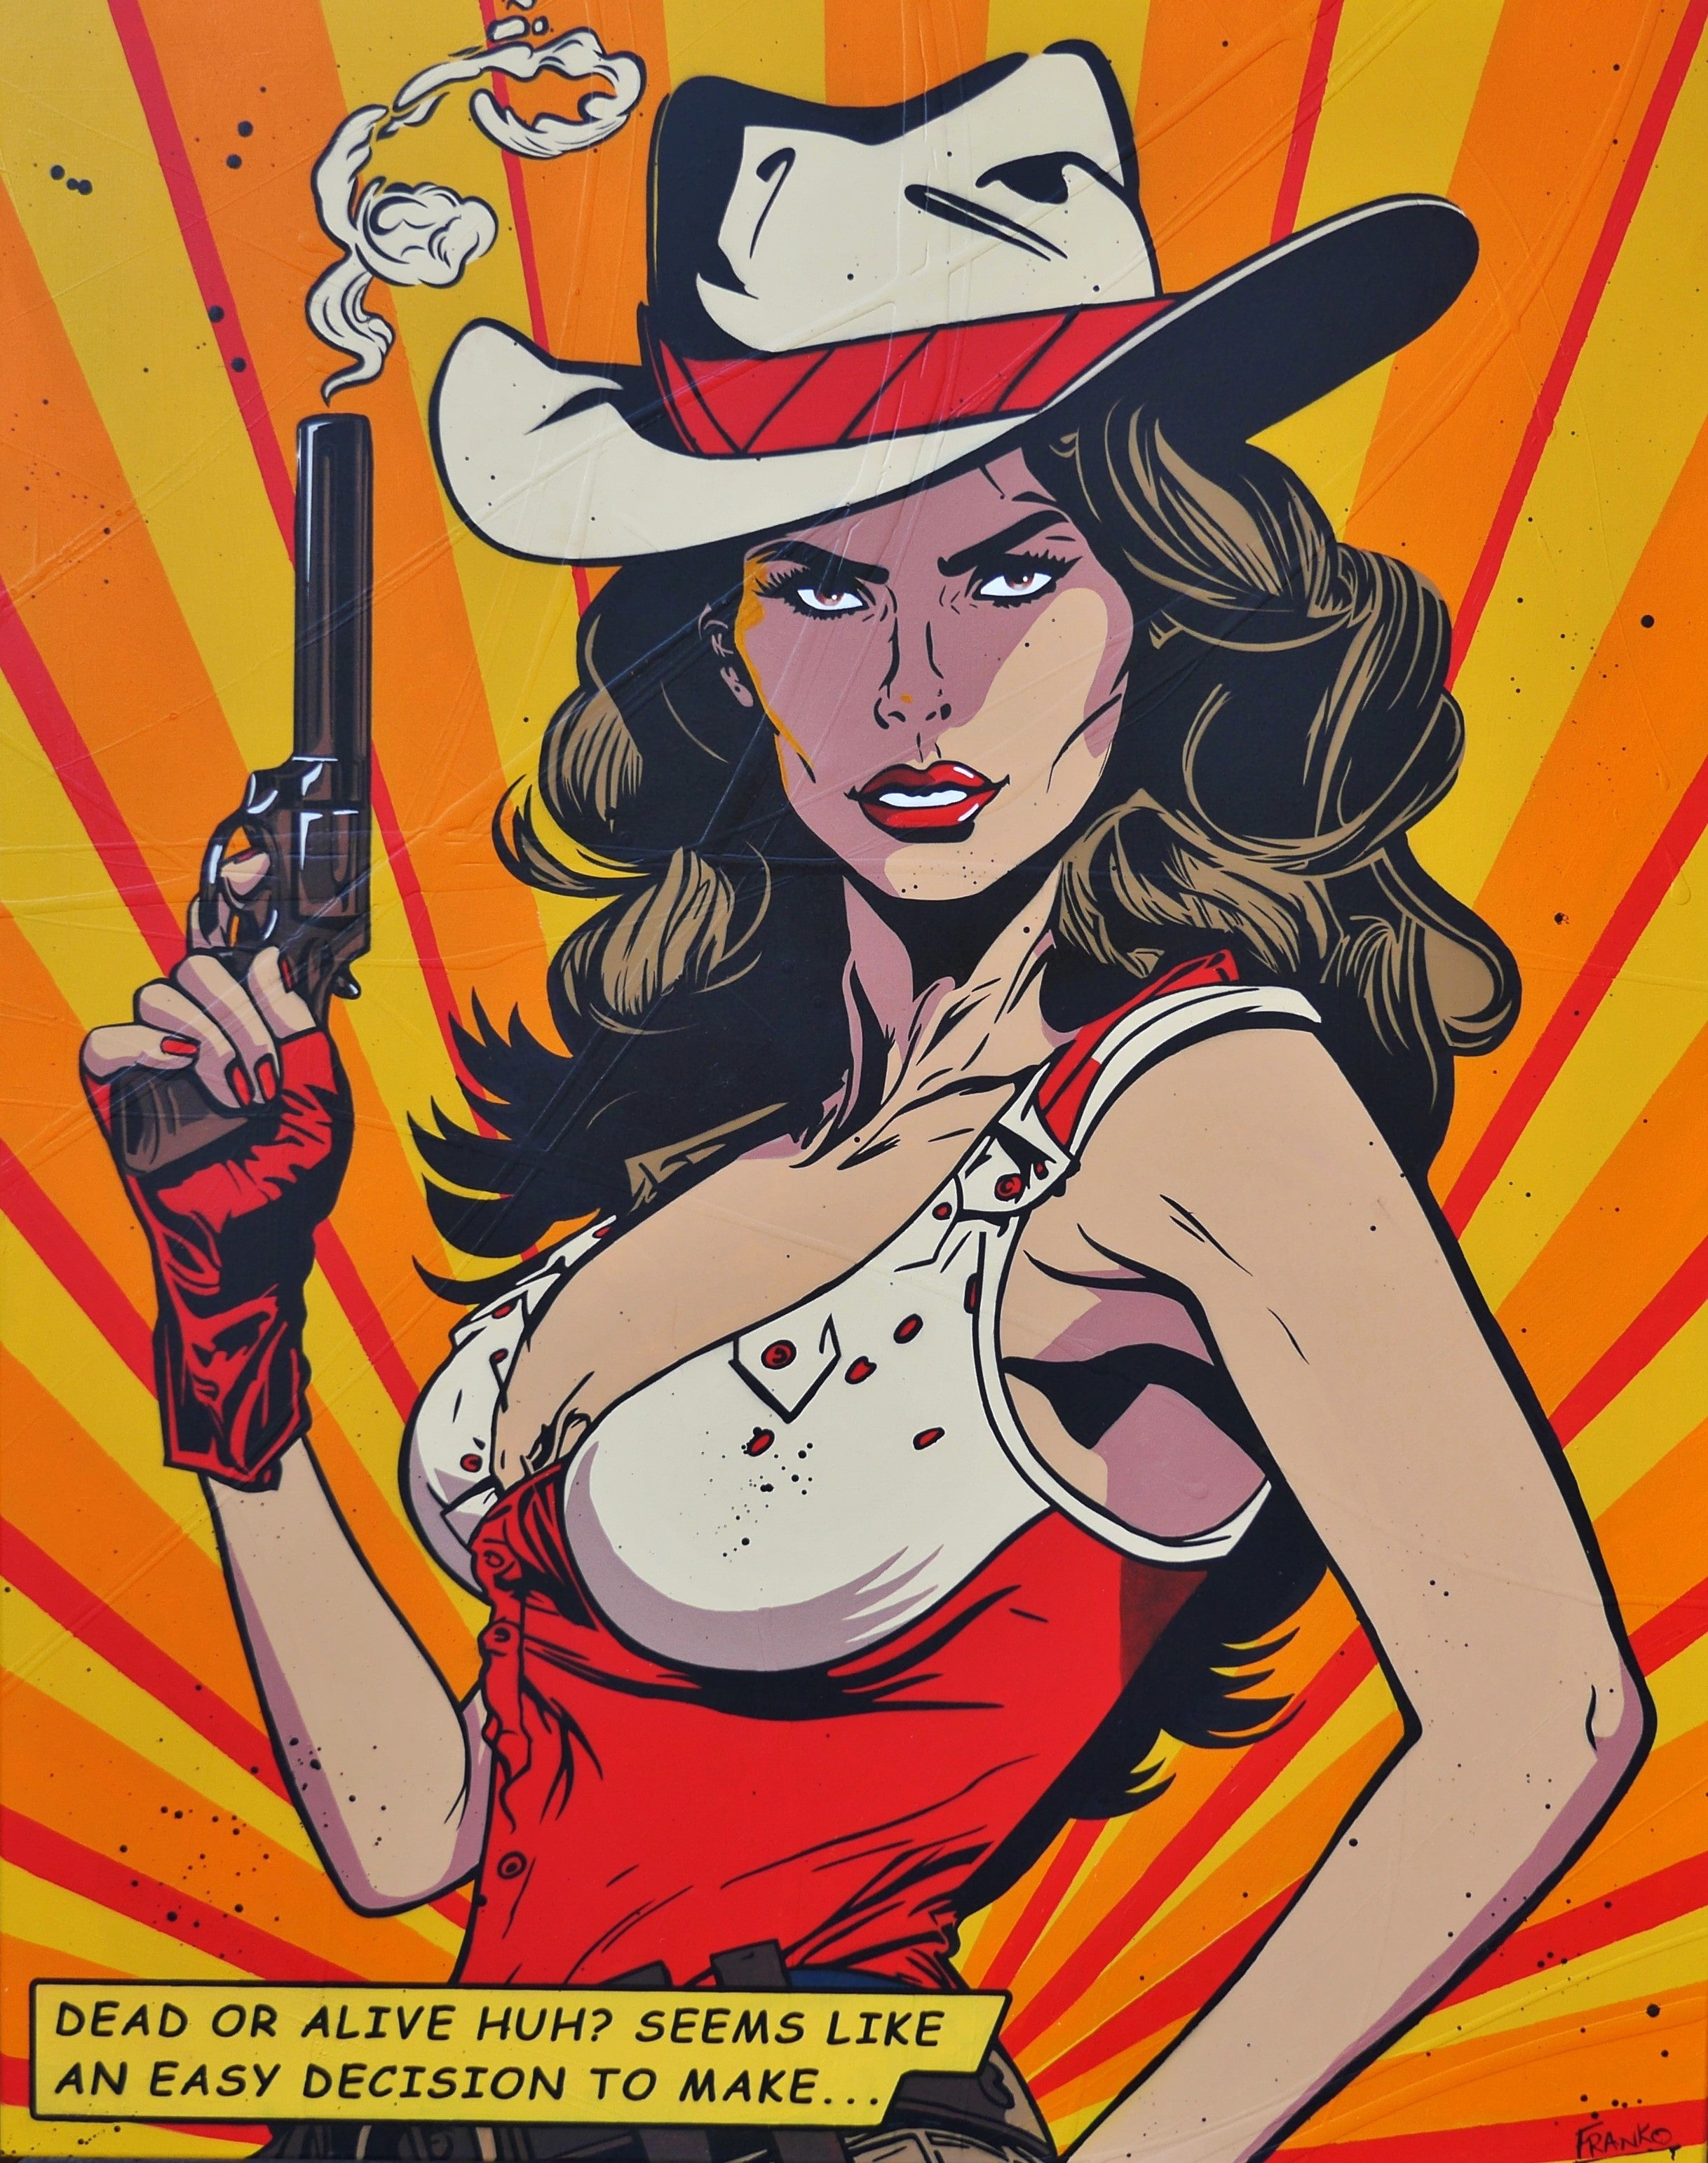 Choices 120cm x 150cm Cowgirl Textured Urban Pop Art Painting (SOLD)